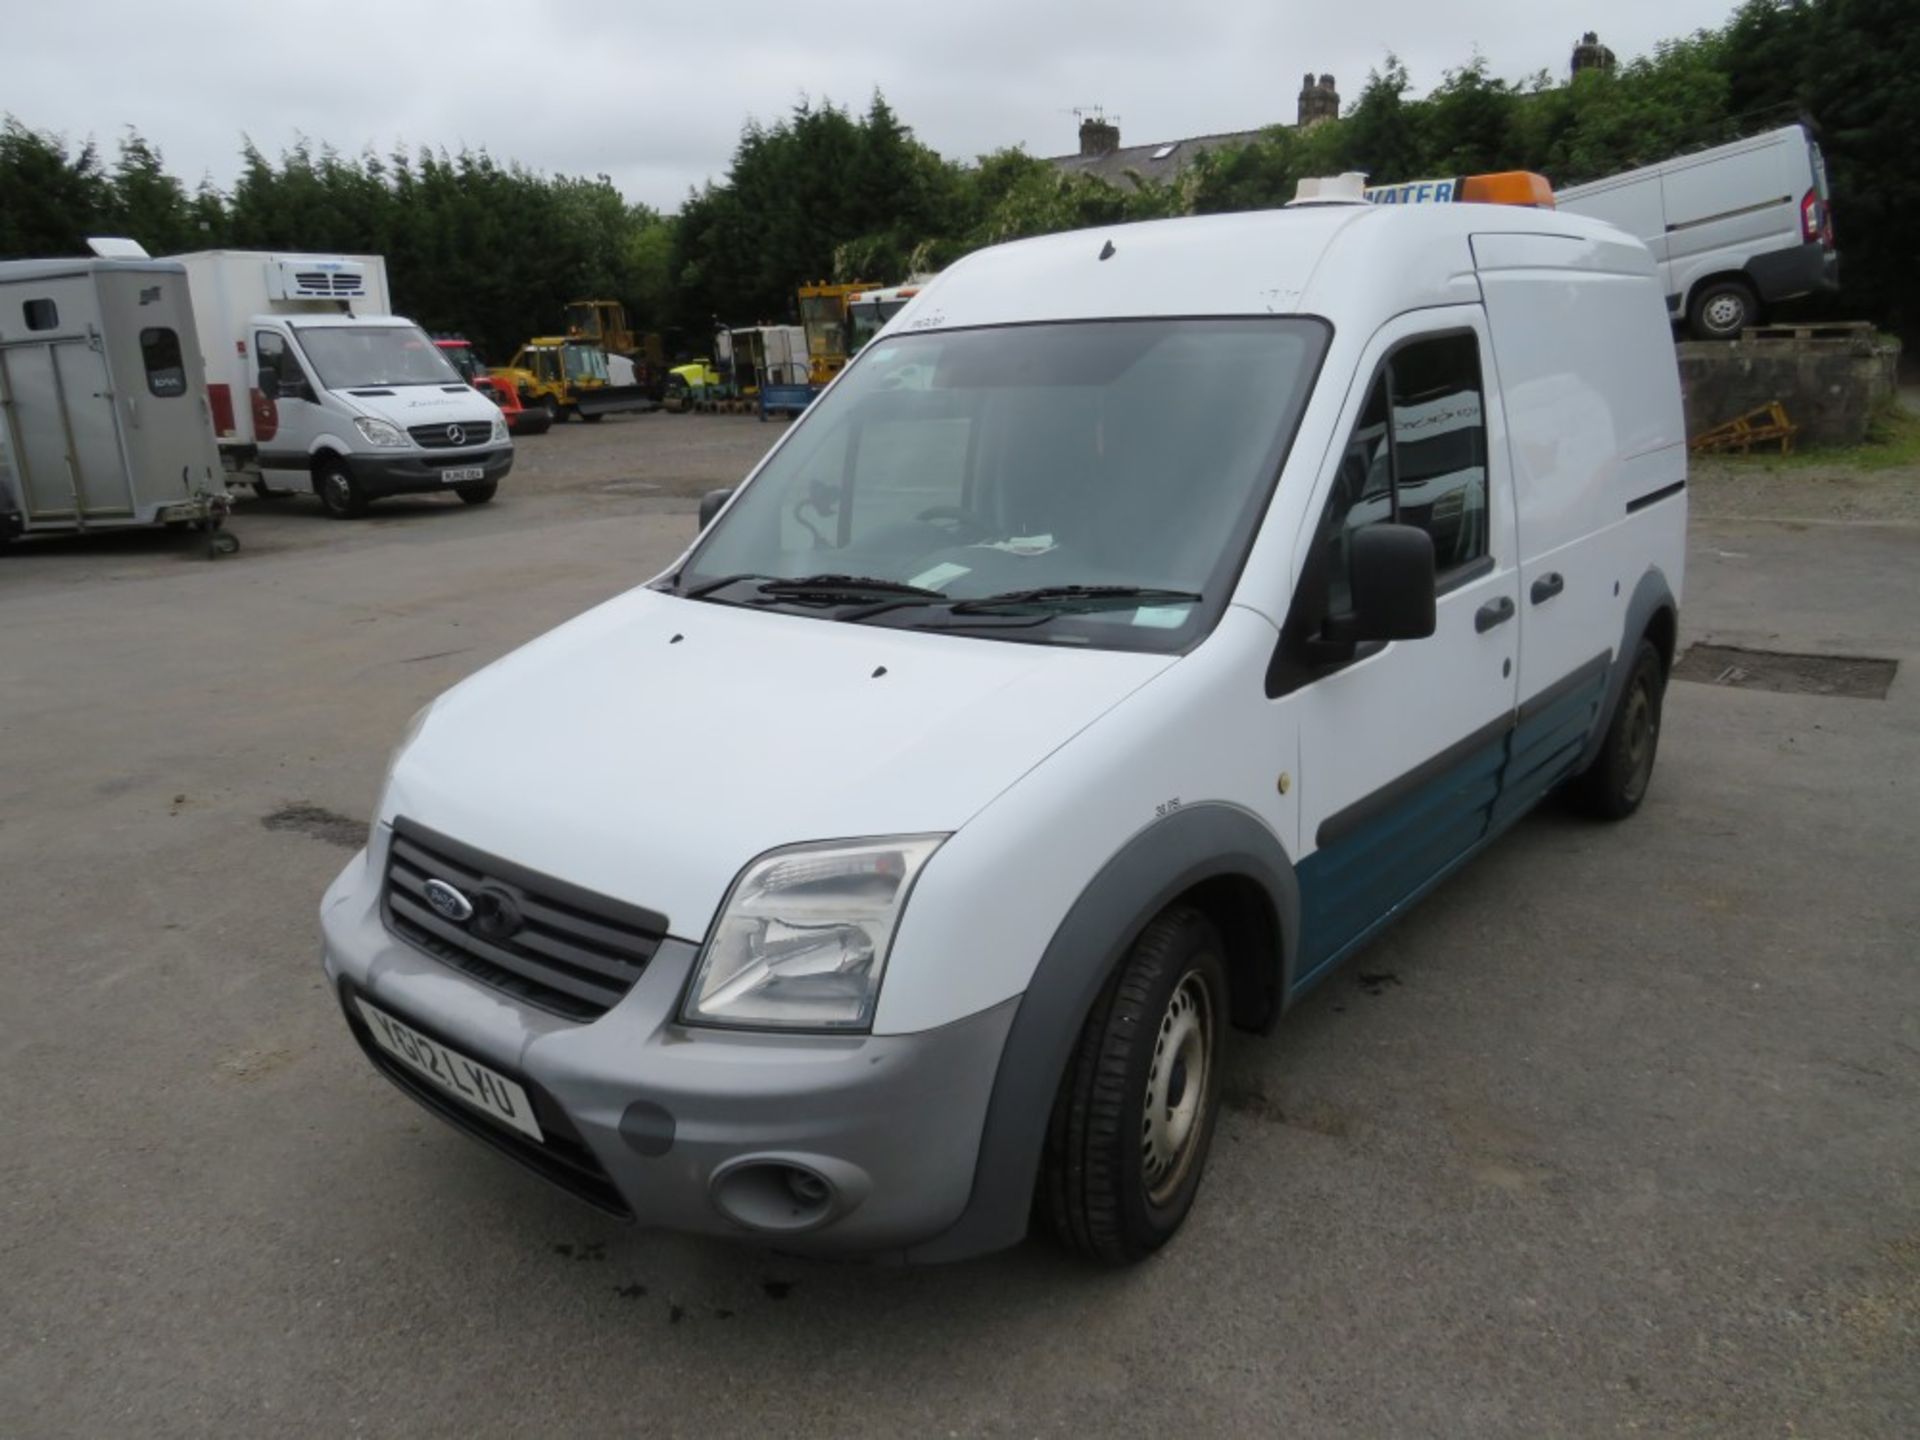 12 reg FORD TRANSIT CONNECT 90 T230 (DIRECT UNITED UTILITIES WATER) 1ST REG 03/12, TEST 10/20, - Image 2 of 5